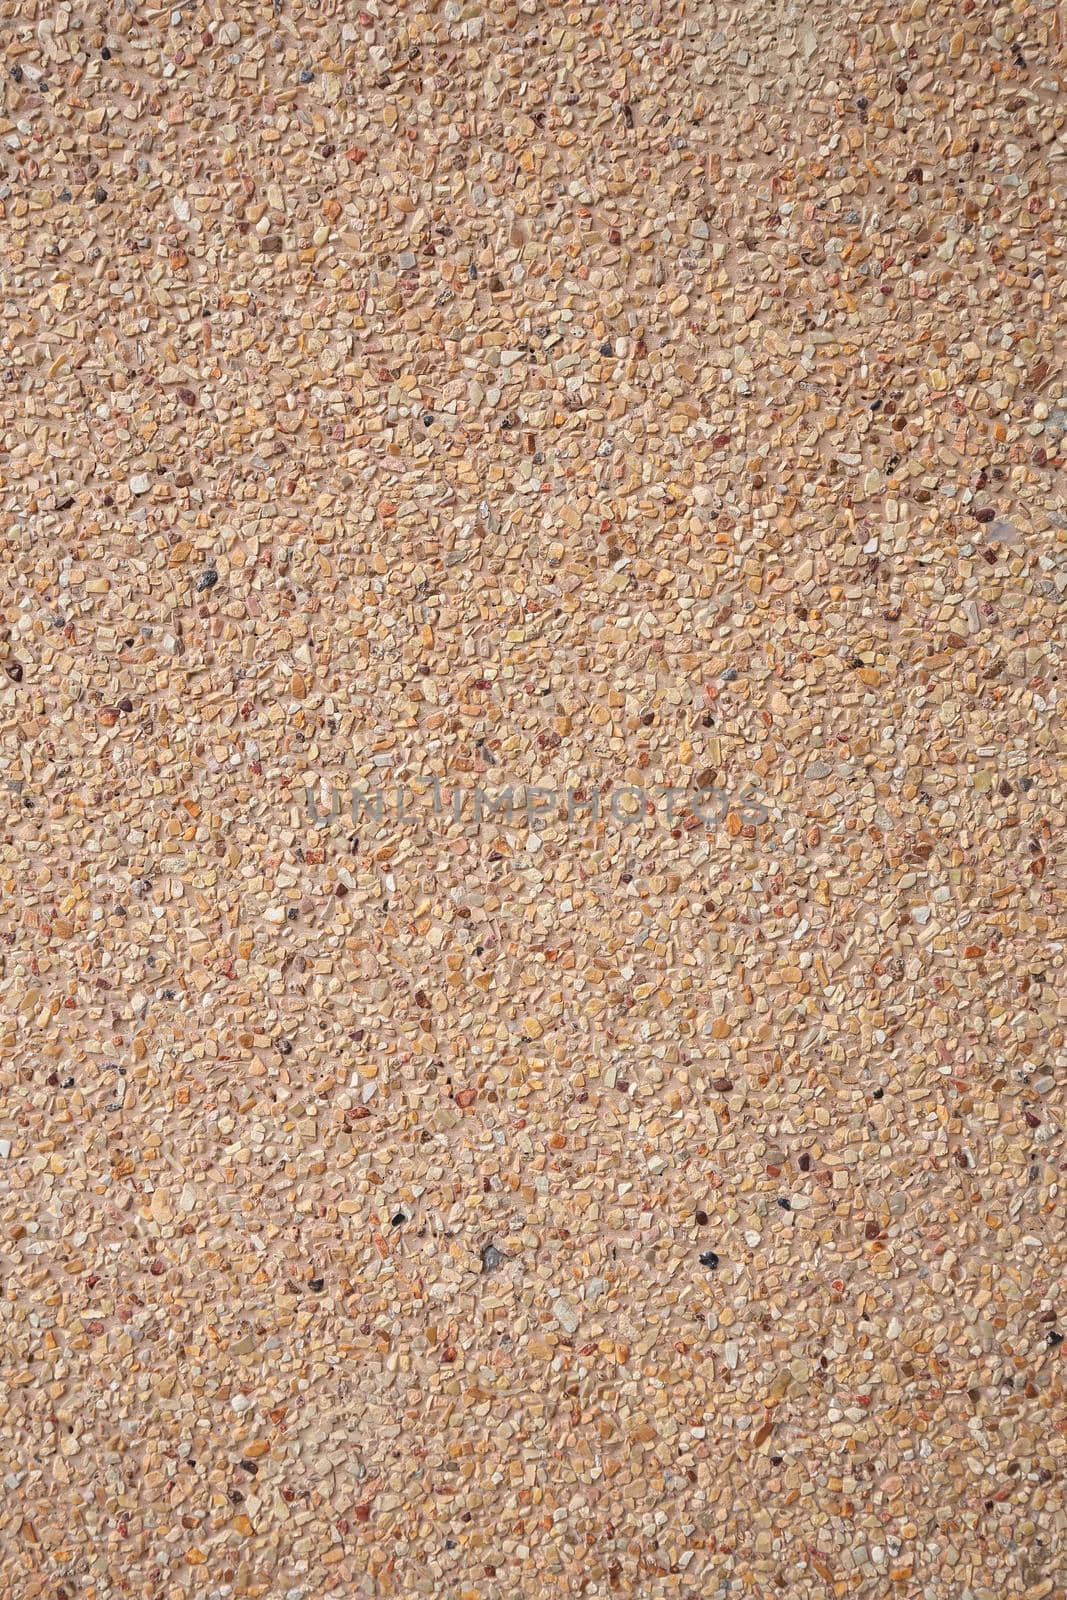 brown small granite stone wall background texture